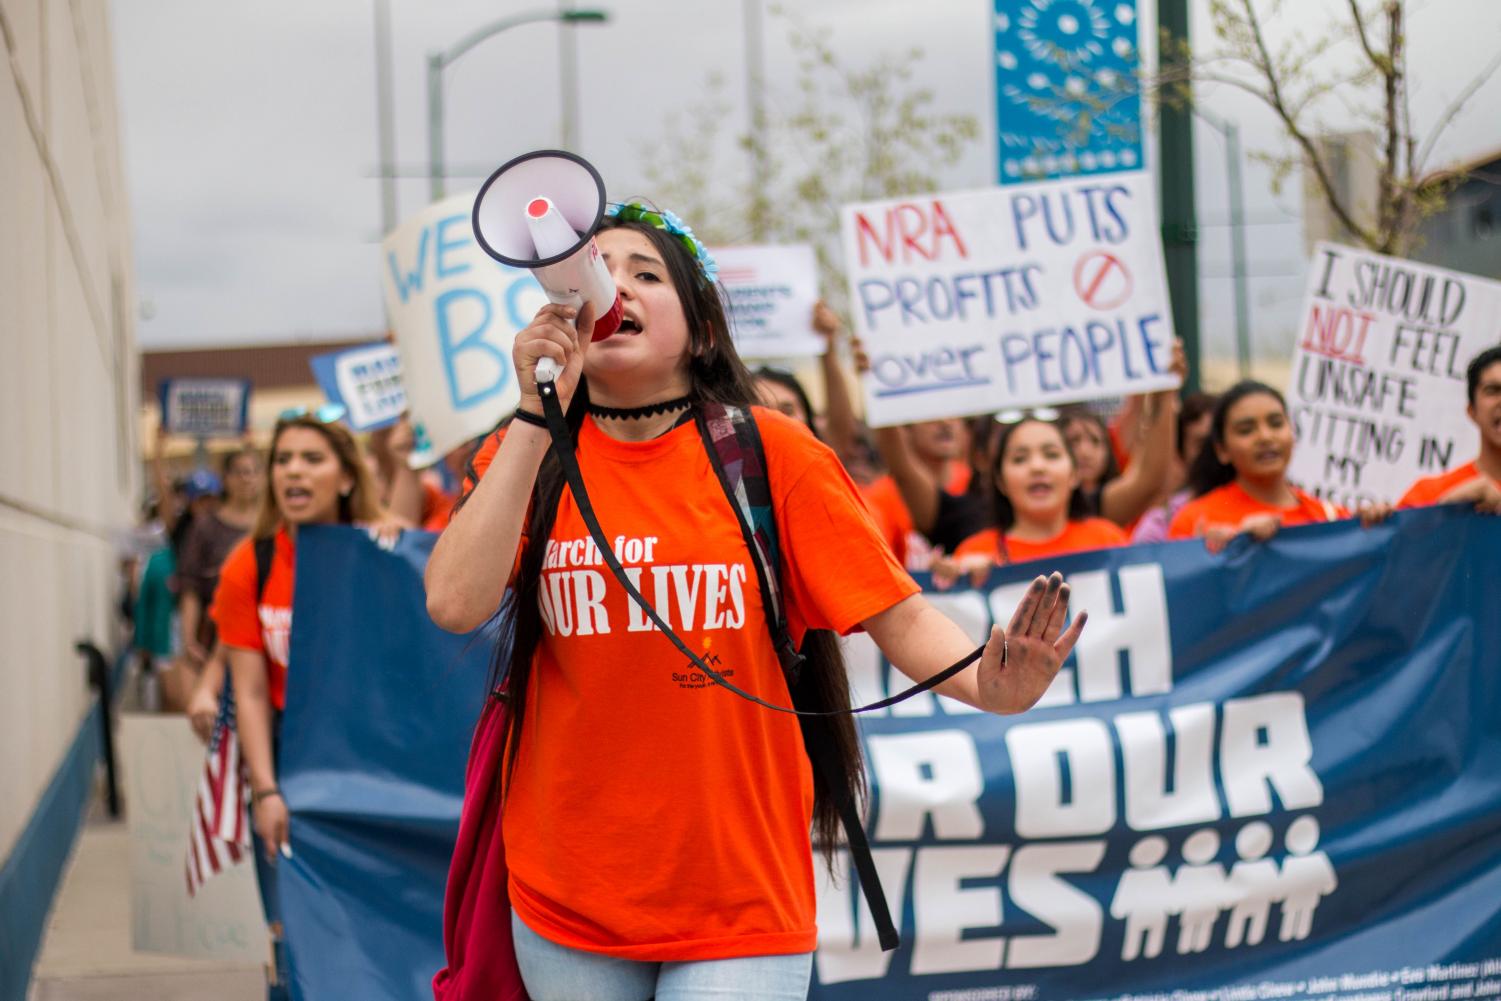 March+For+Our+Lives+rally+takes+over+downtown+El+Paso